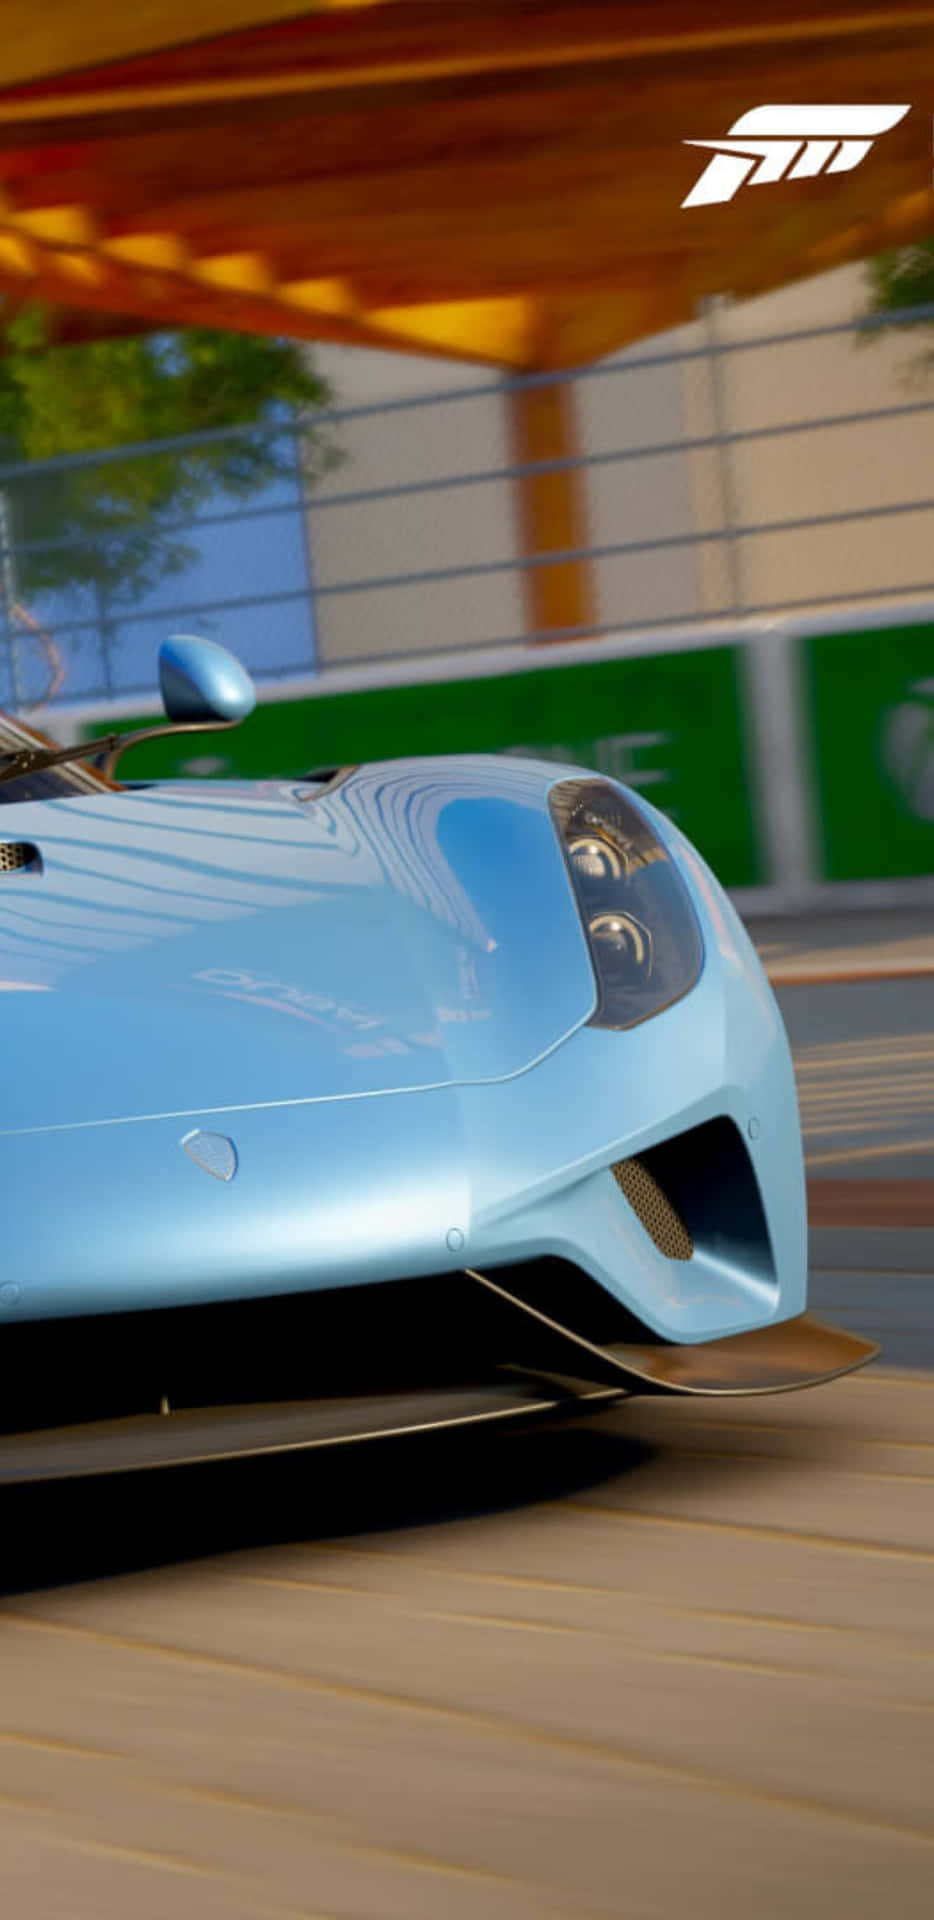 Take a lap in Forza Motorsport 7 on your Pixel 3xl